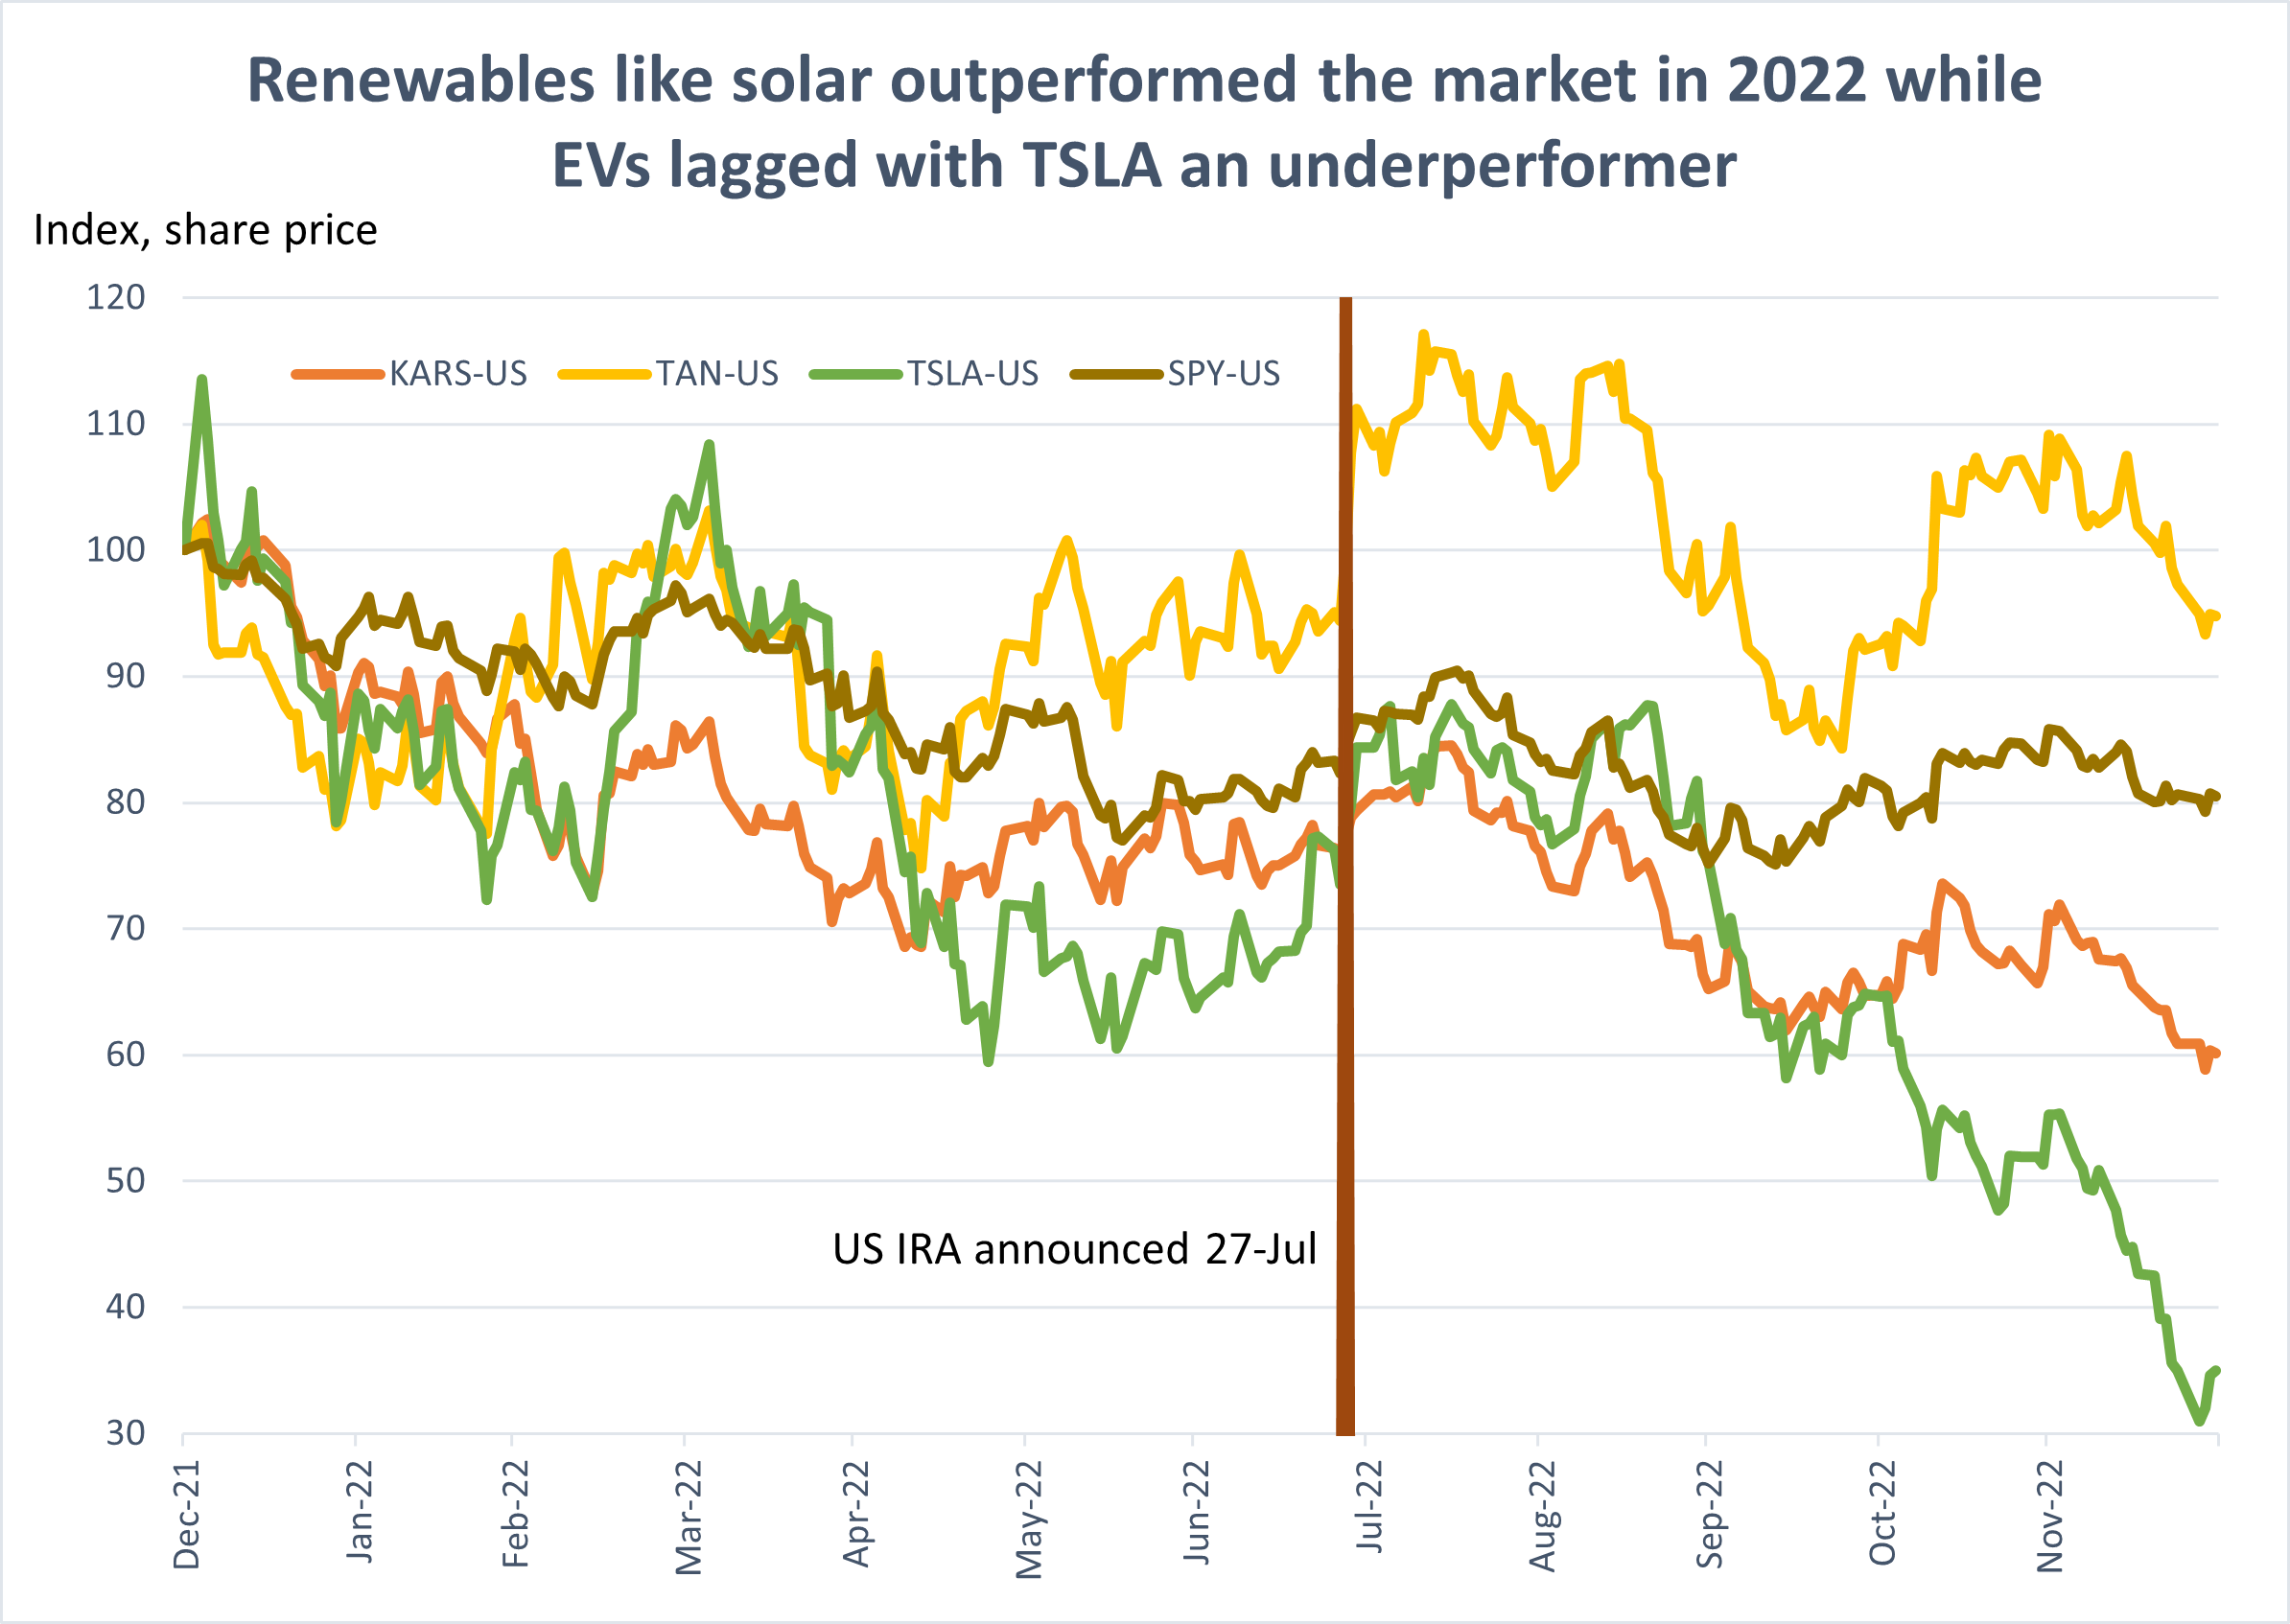 renewables-like-solar-outperformed-the-market-in-2022-while-evs-lagged-with-tsla-an-underperformer